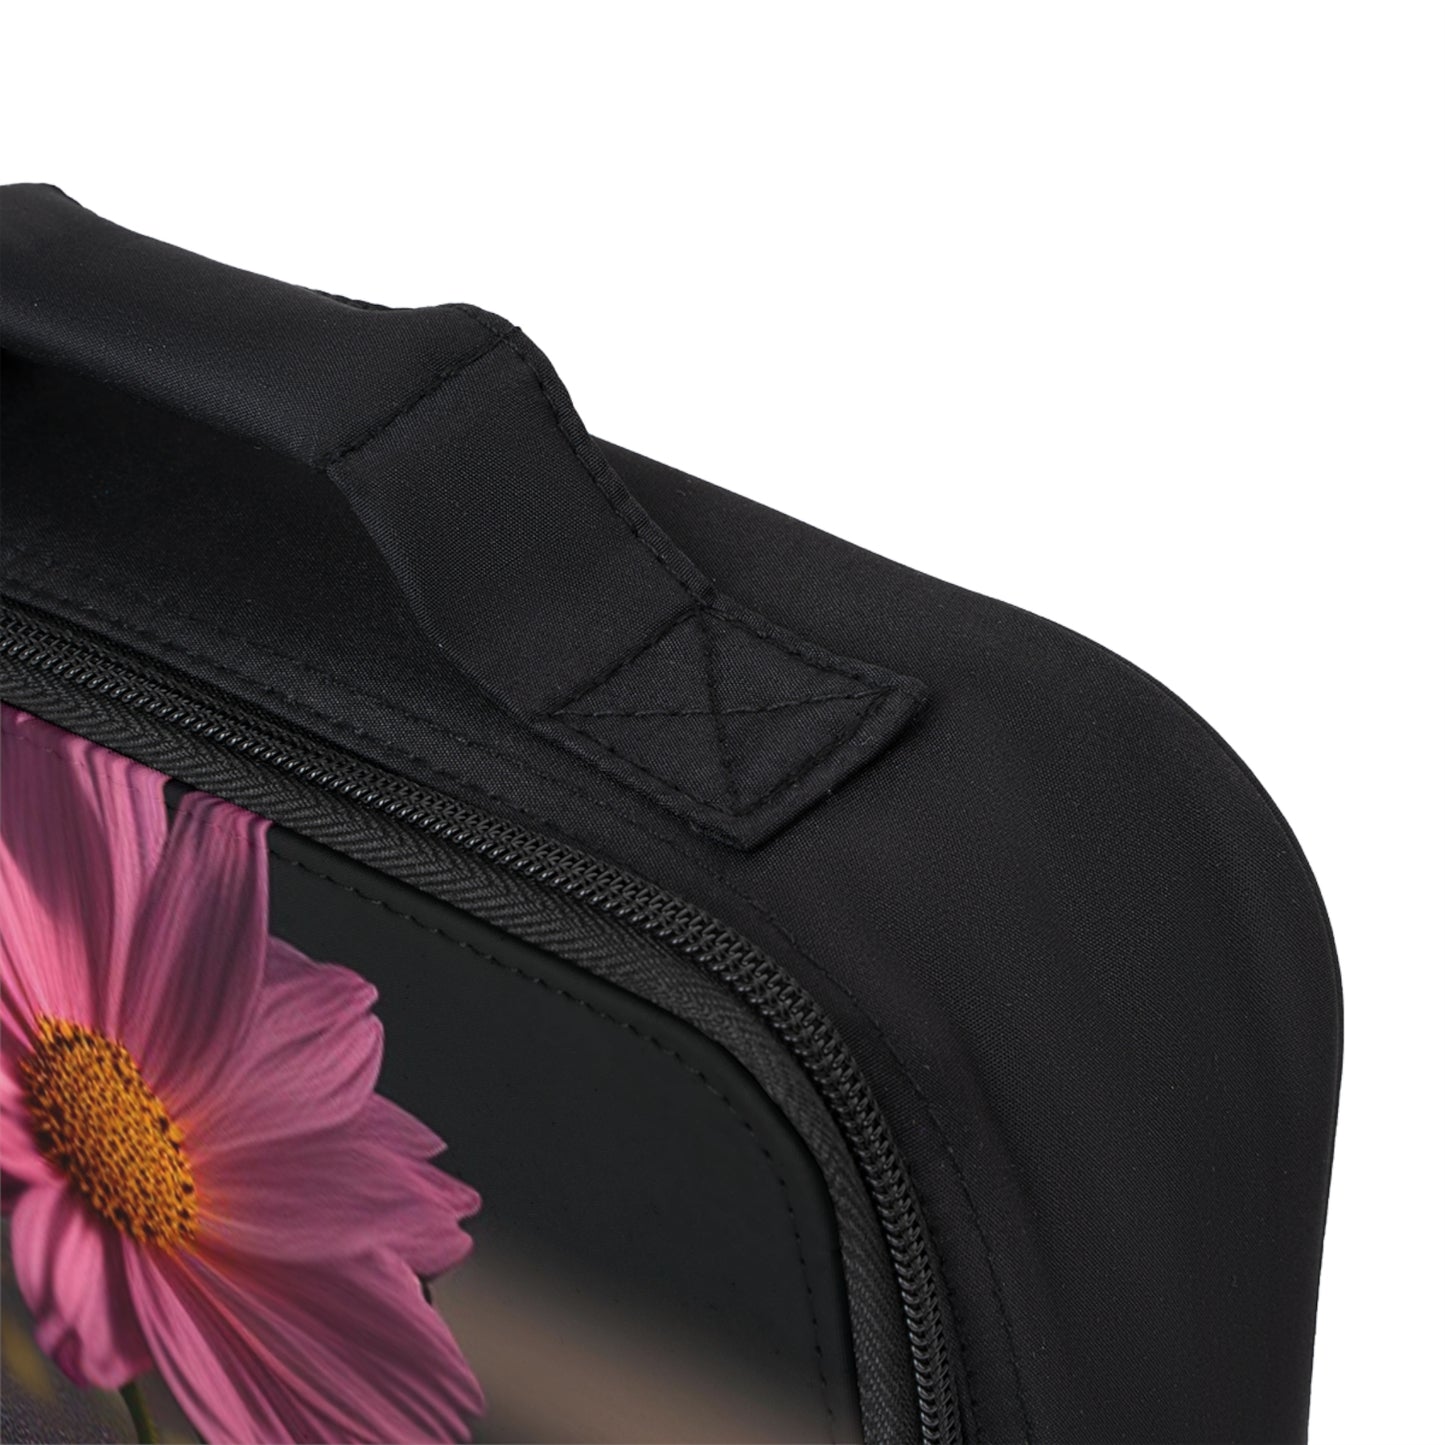 Lunch Bag Pink Daisy 4